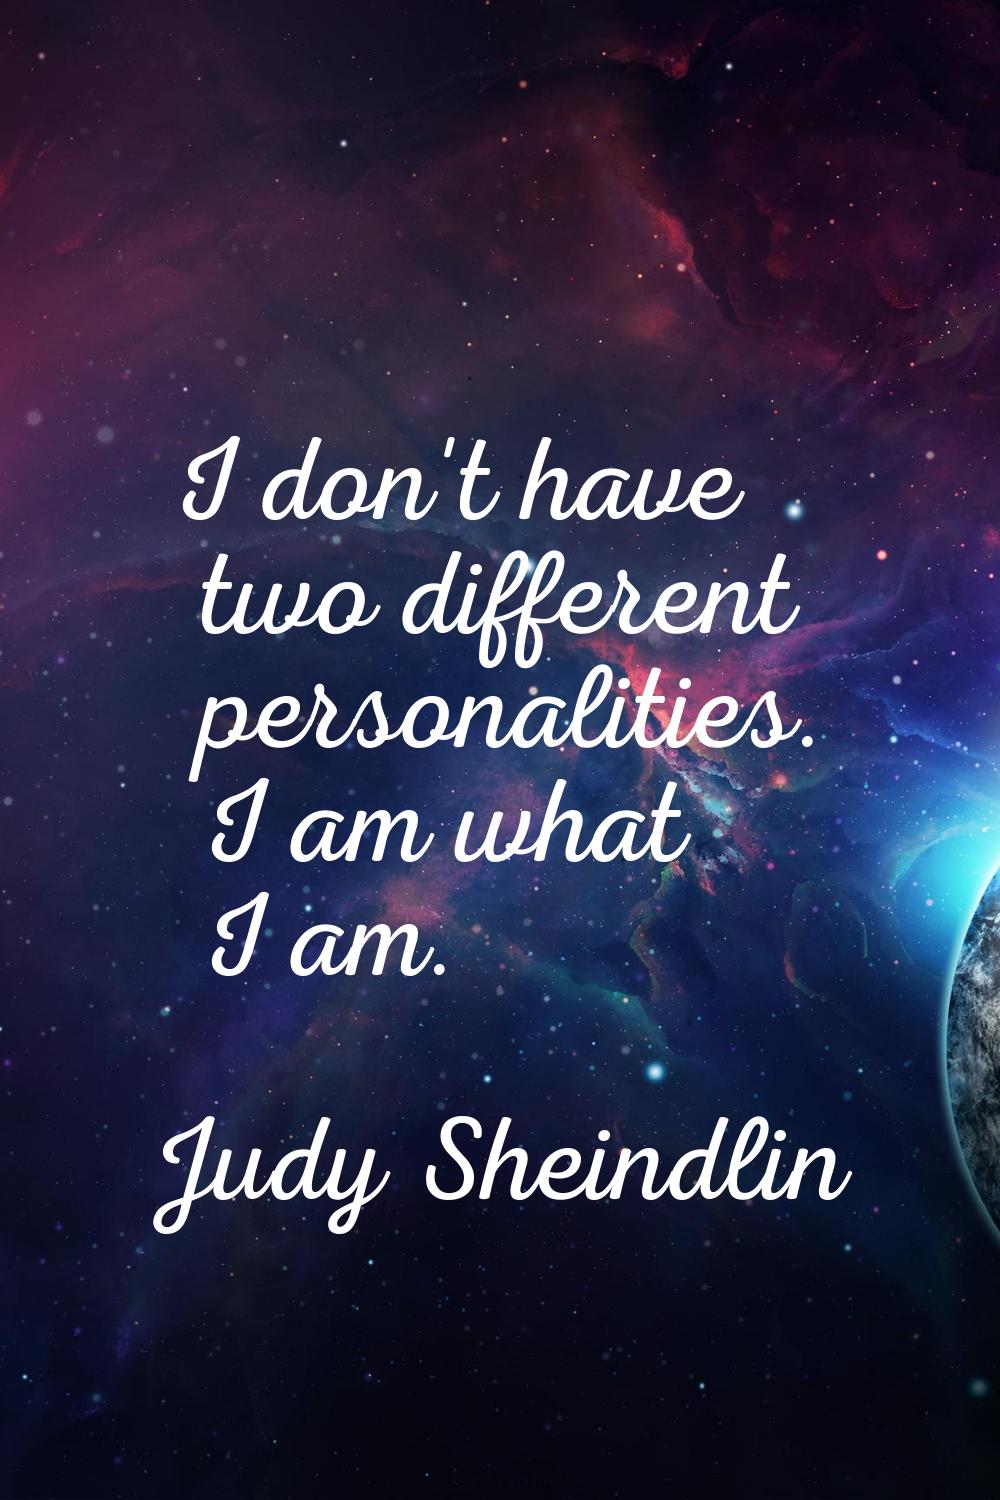 I don't have two different personalities. I am what I am.